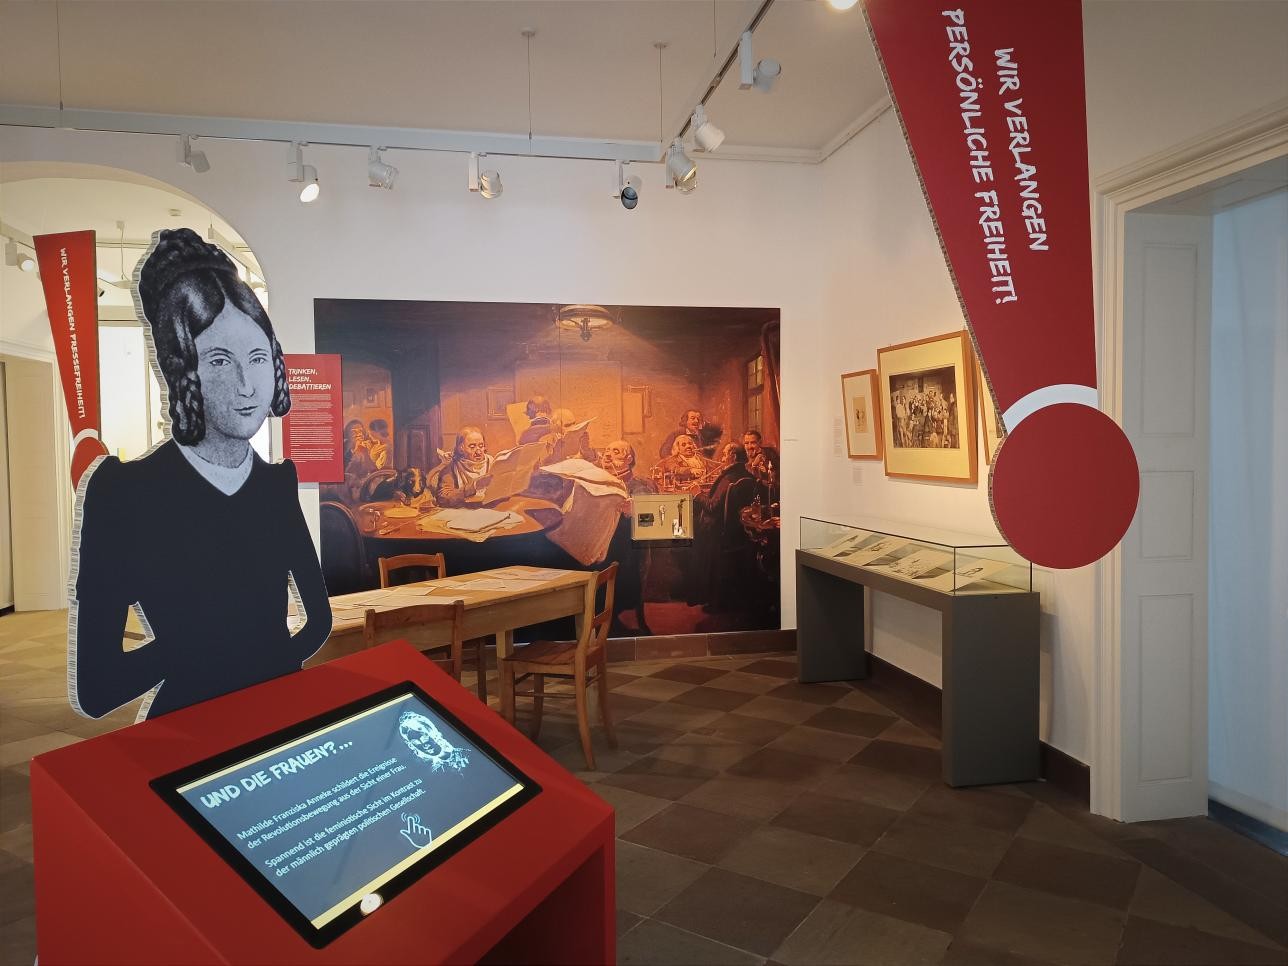 A room with exhibits in the Rastatt City Museum, with an information terminal in the foreground.